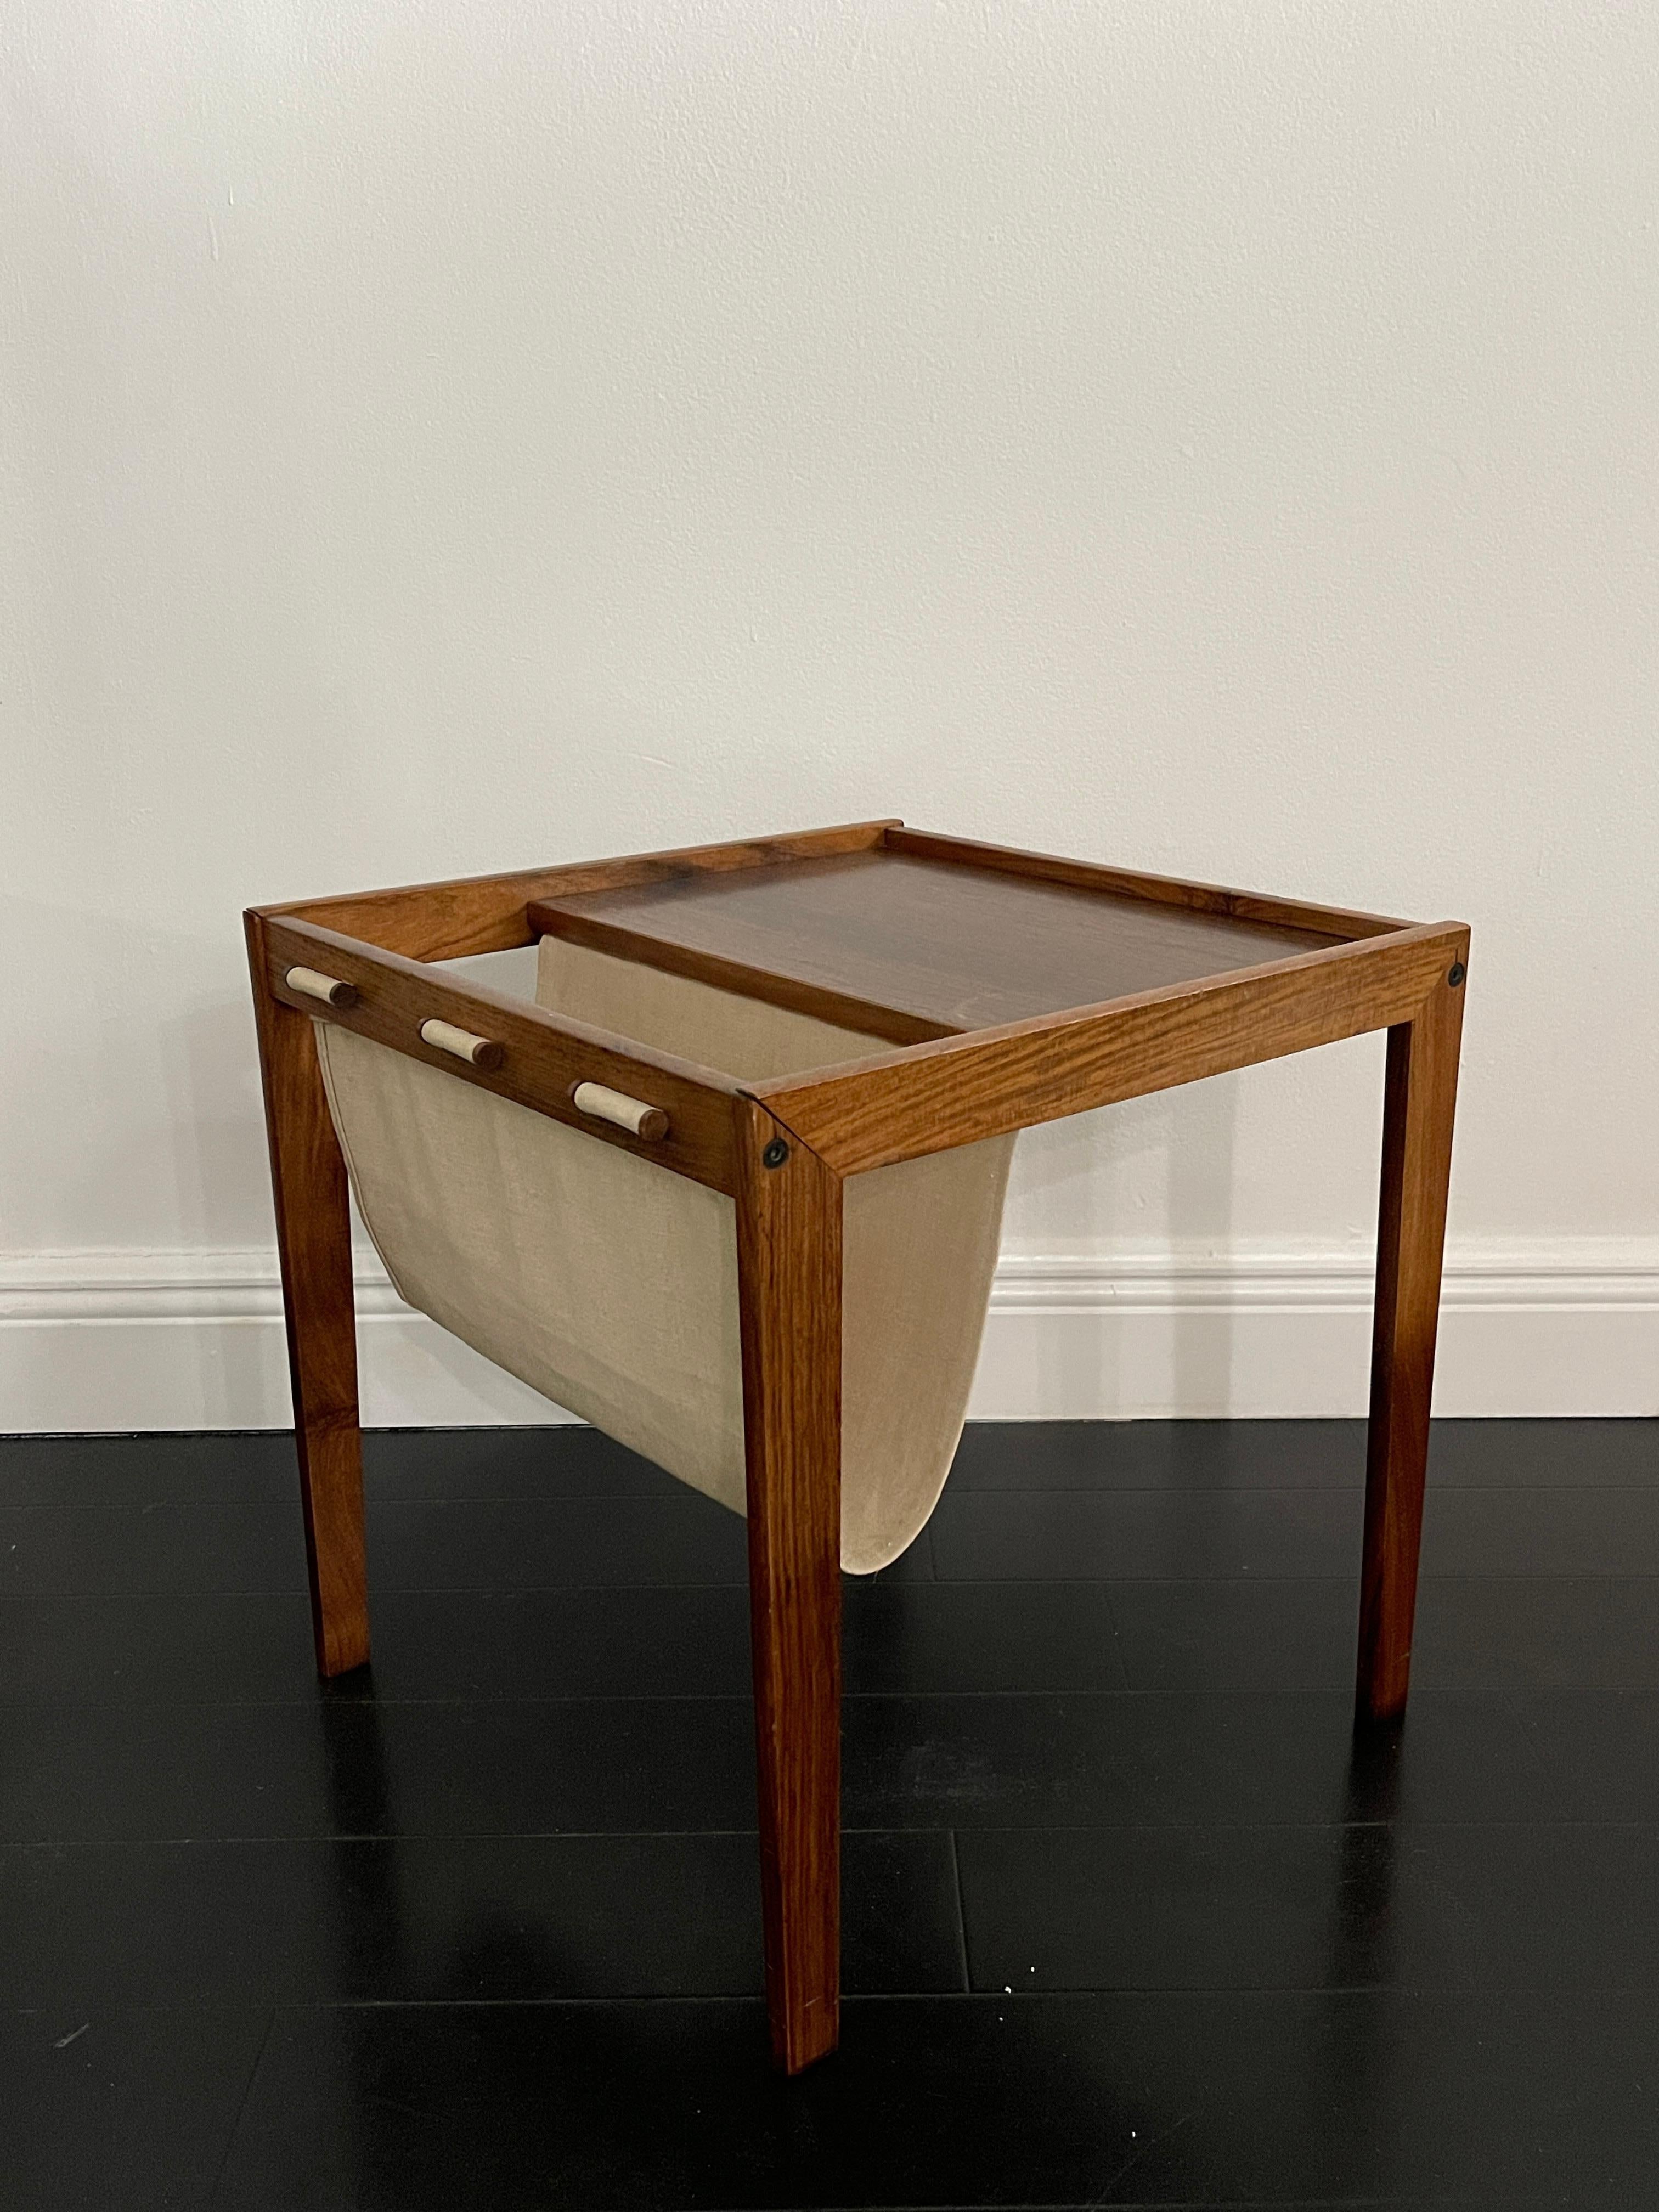 Mid 20th Century Bent Silberg Mobler Danish Modern Magazine Rack / End Table made in Denmark. Perfect side table / end table with a built on canvas magazine holder. Beautiful design with a stamped signature underneath. 